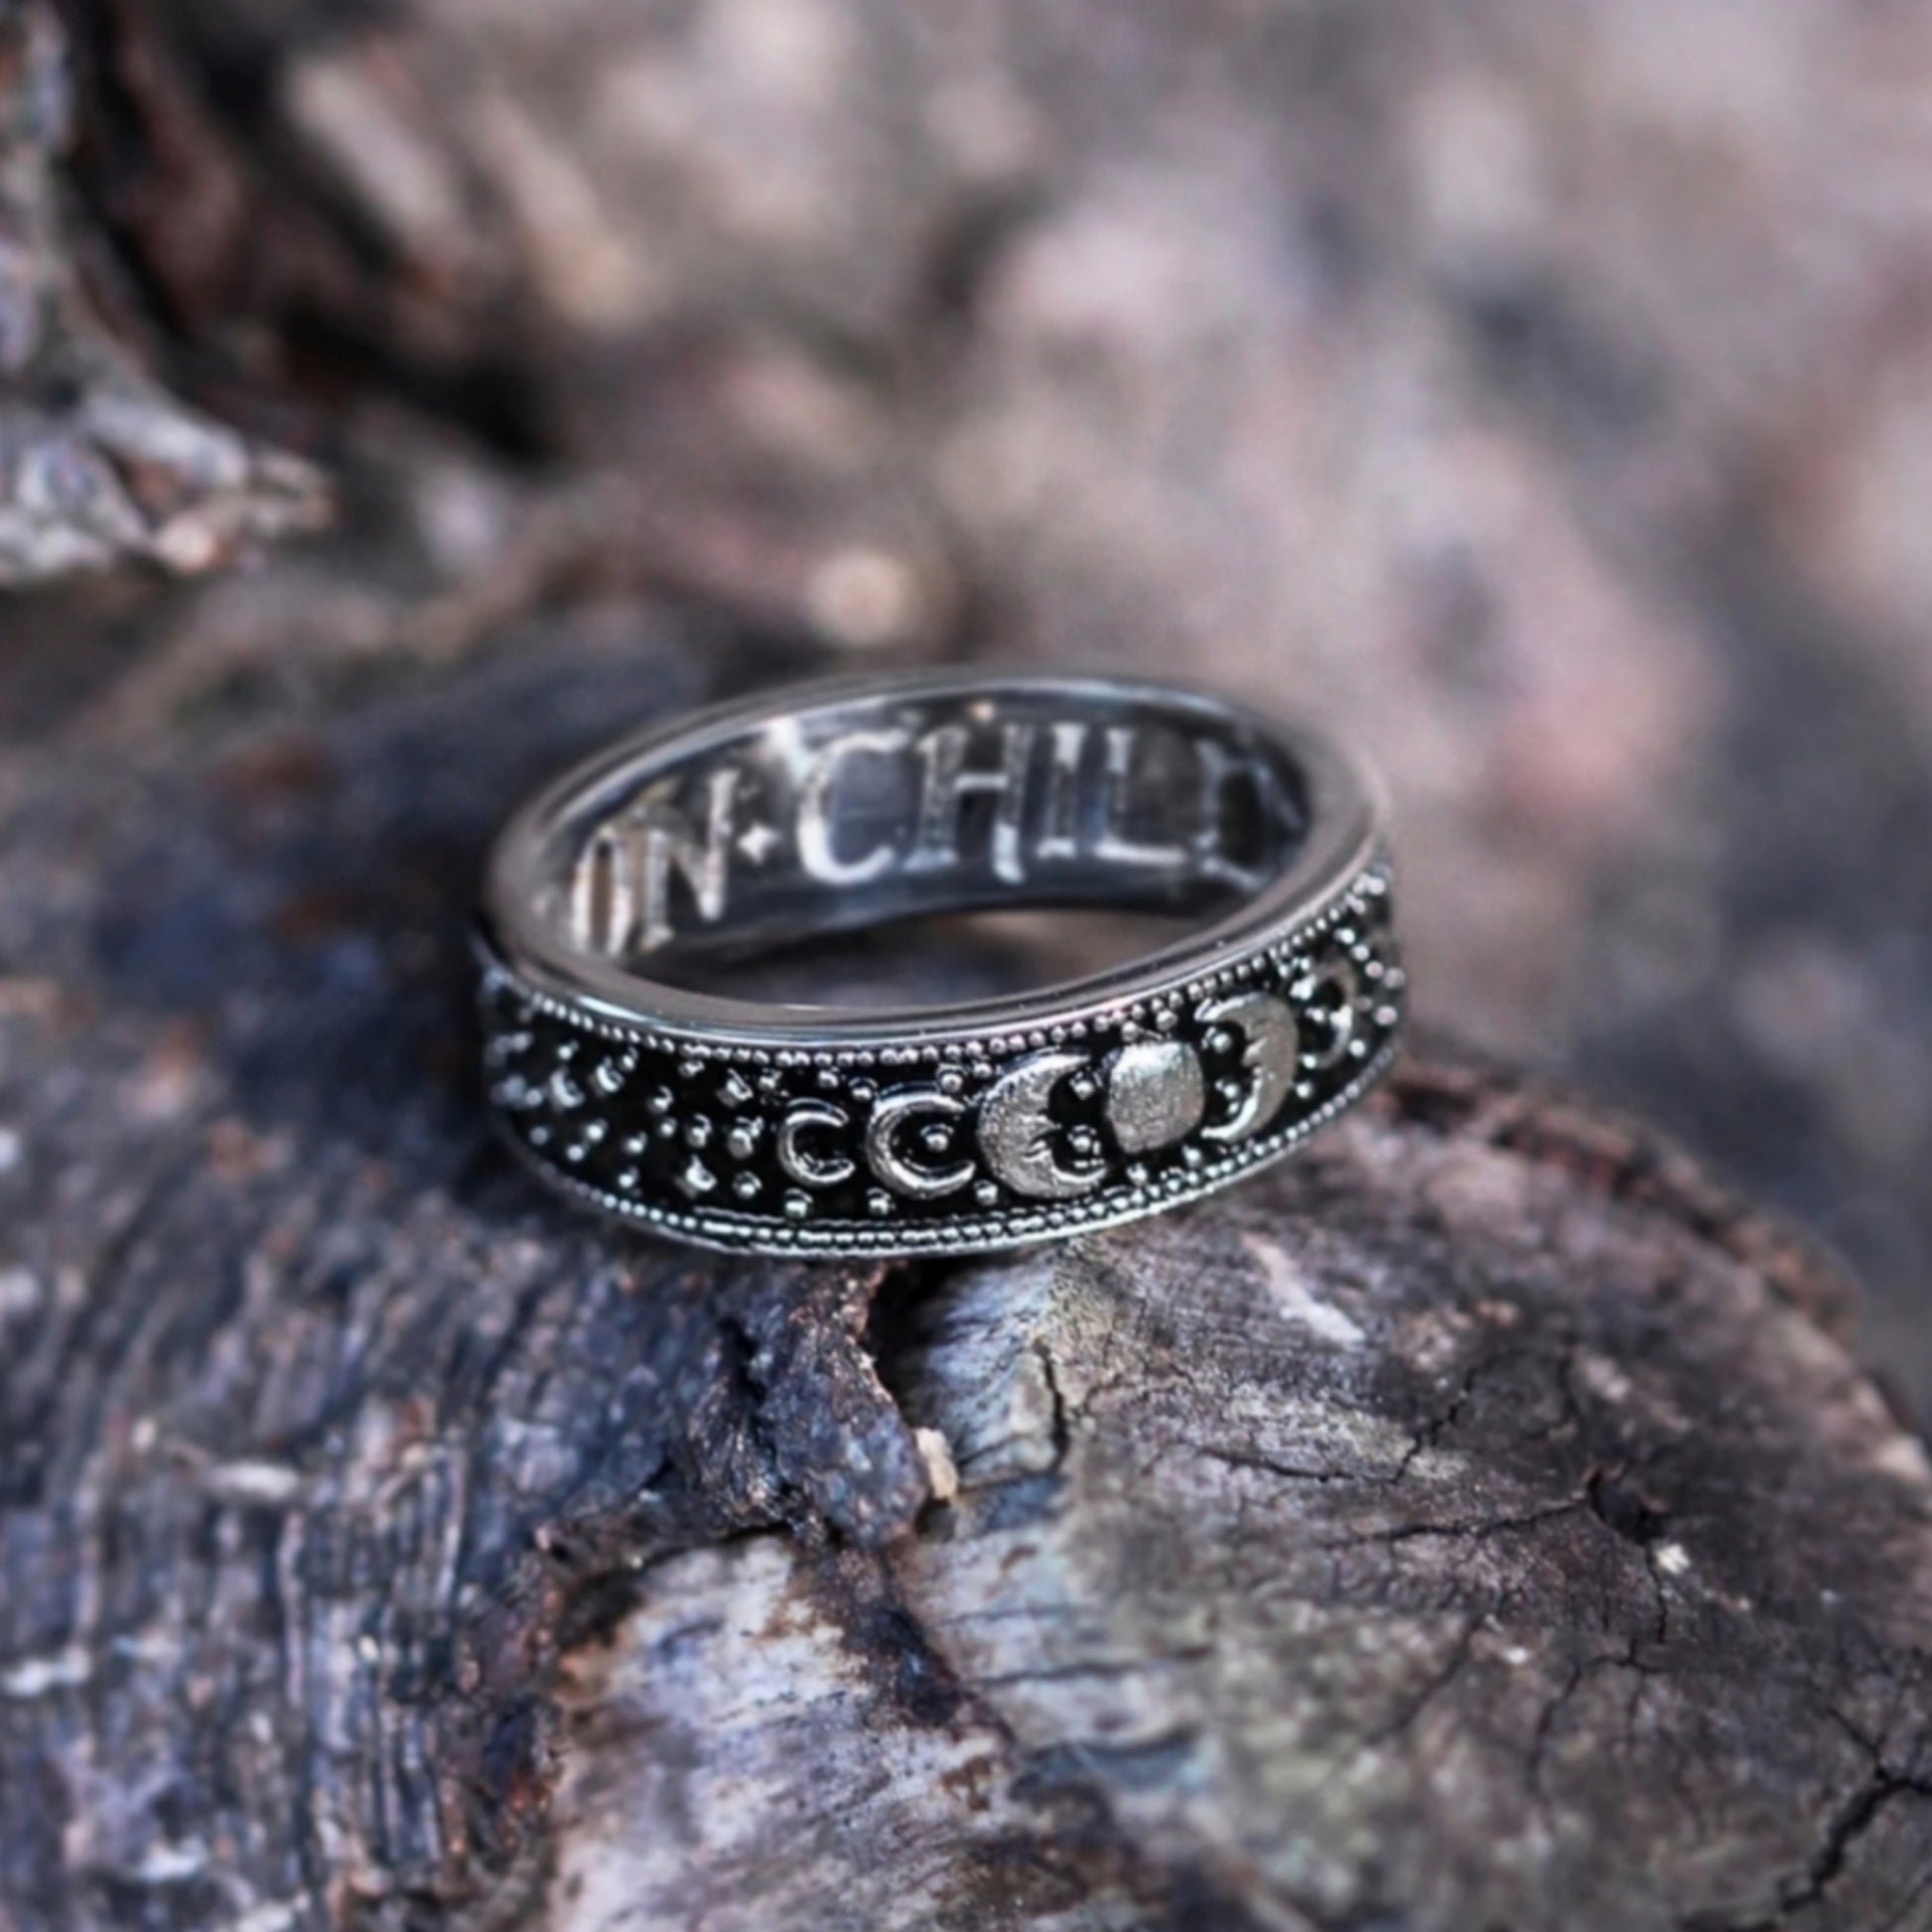 Victorian Moon Ring | Moon Child Inscribed Inside Antique Finish Silver - Rogue + Wolf - Rings